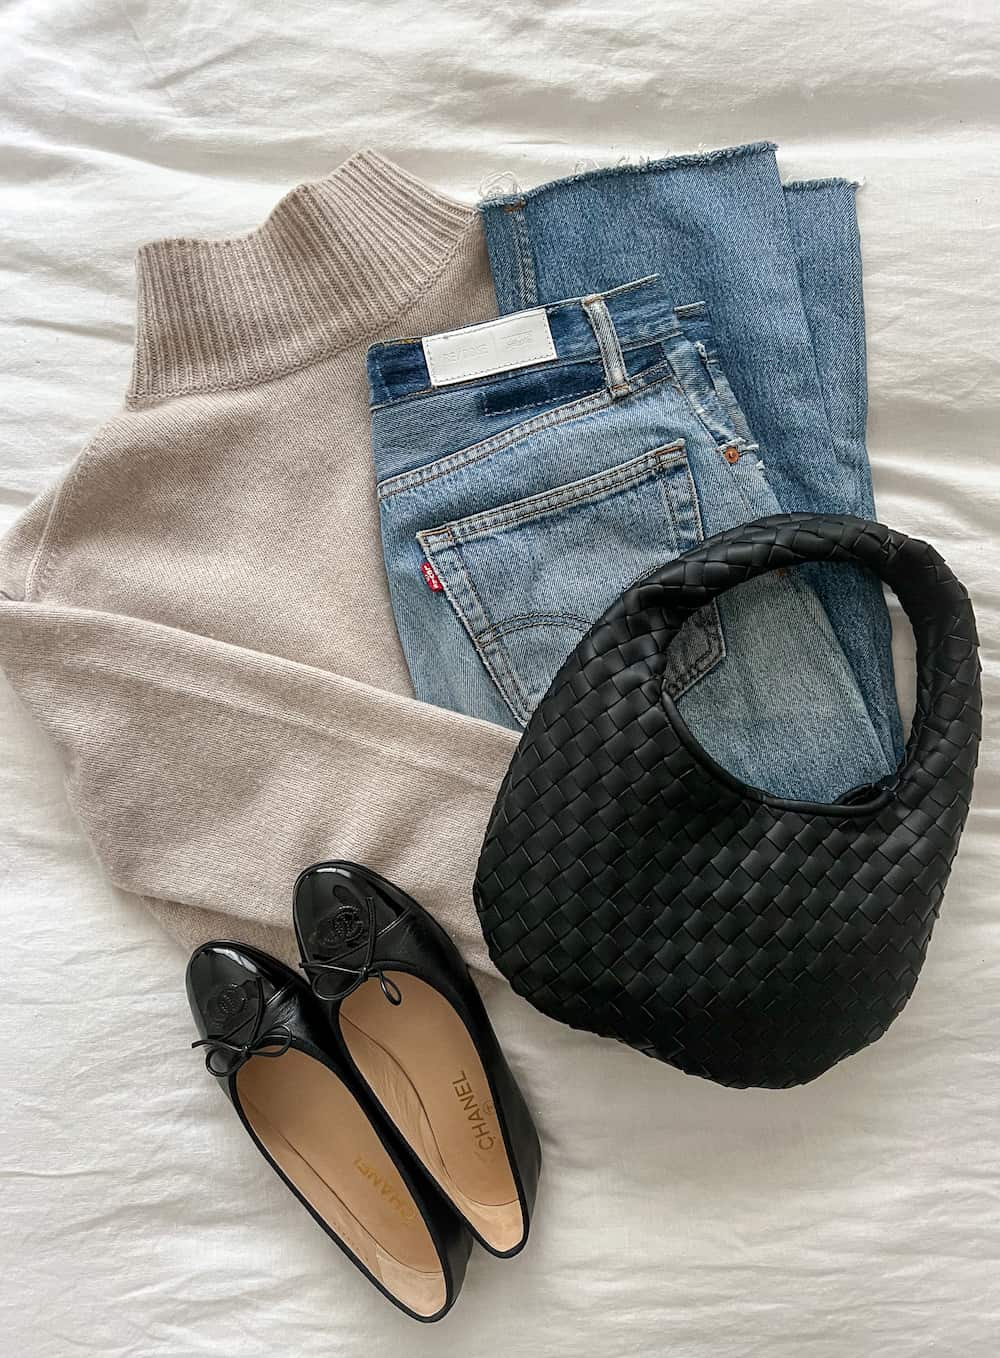 outfit flat lay with capsule wardrobe pieces including a beige turtleneck, jeans, black ballet flats and an Oak & Fort woven black bag